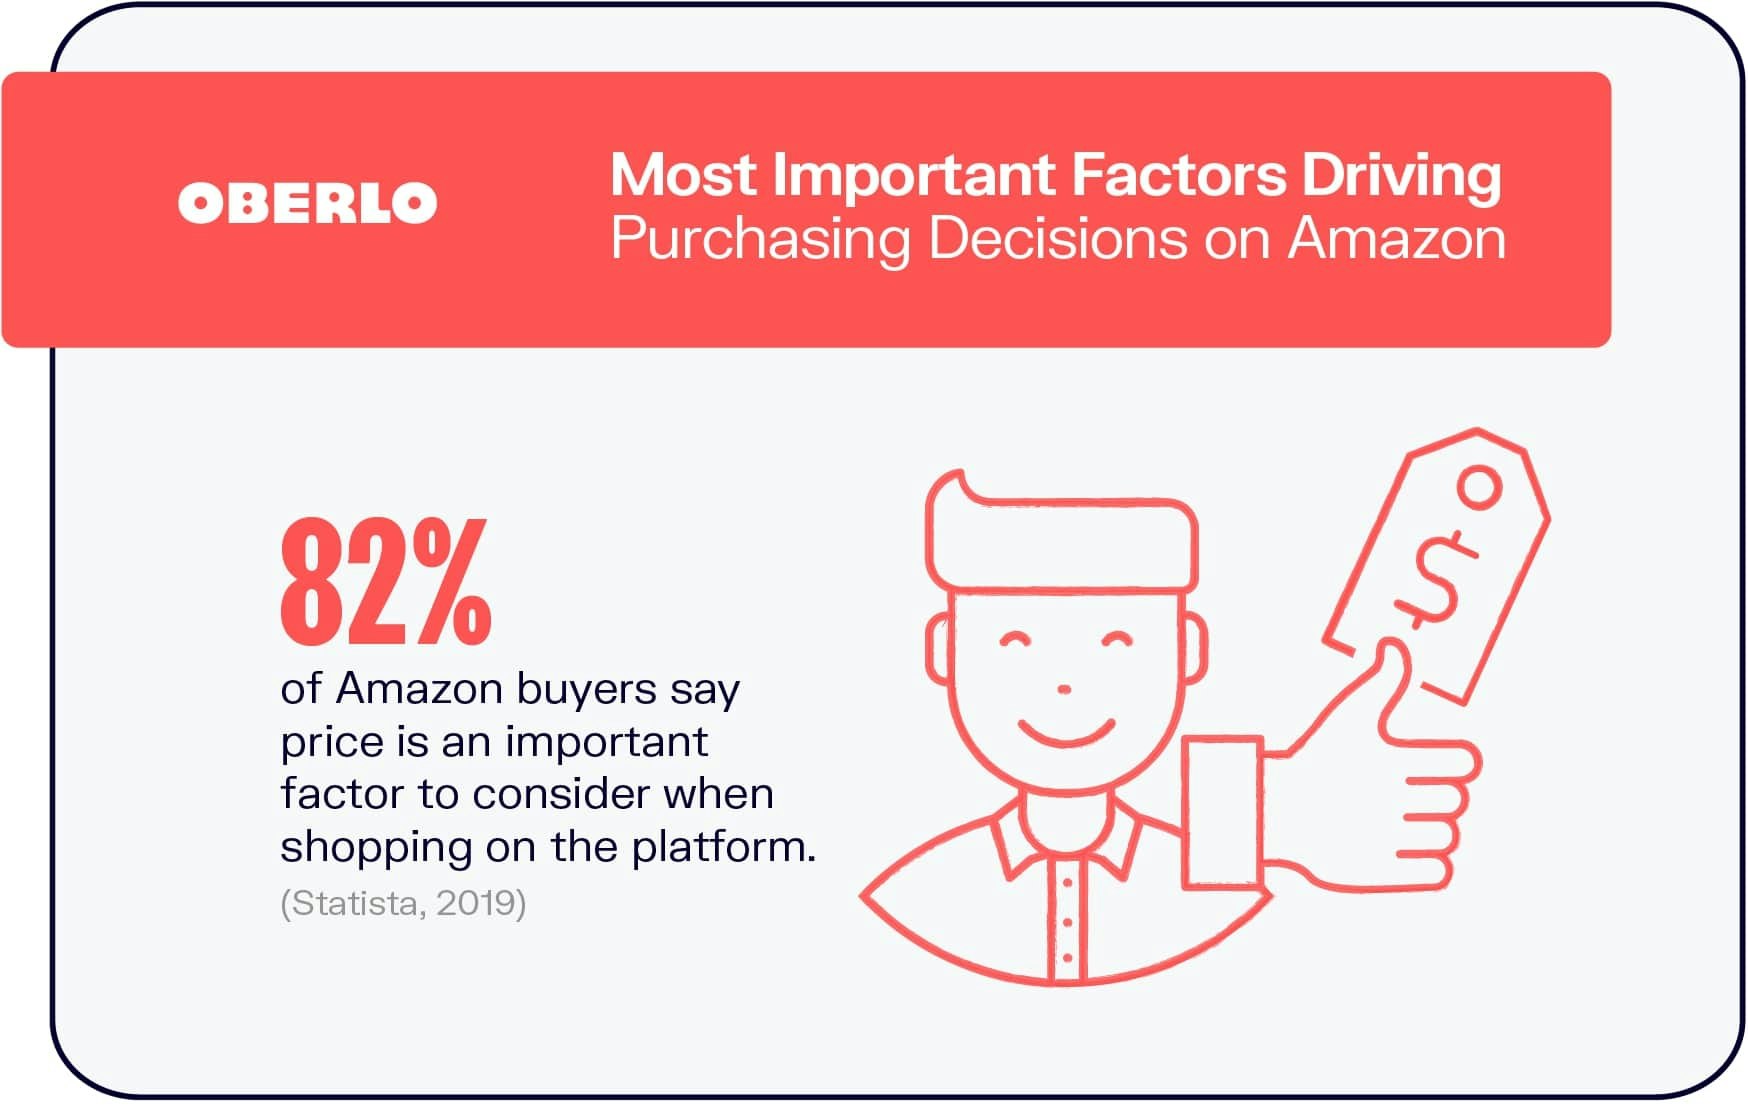 Most Important Factors Driving Purchasing Decisions on Amazon